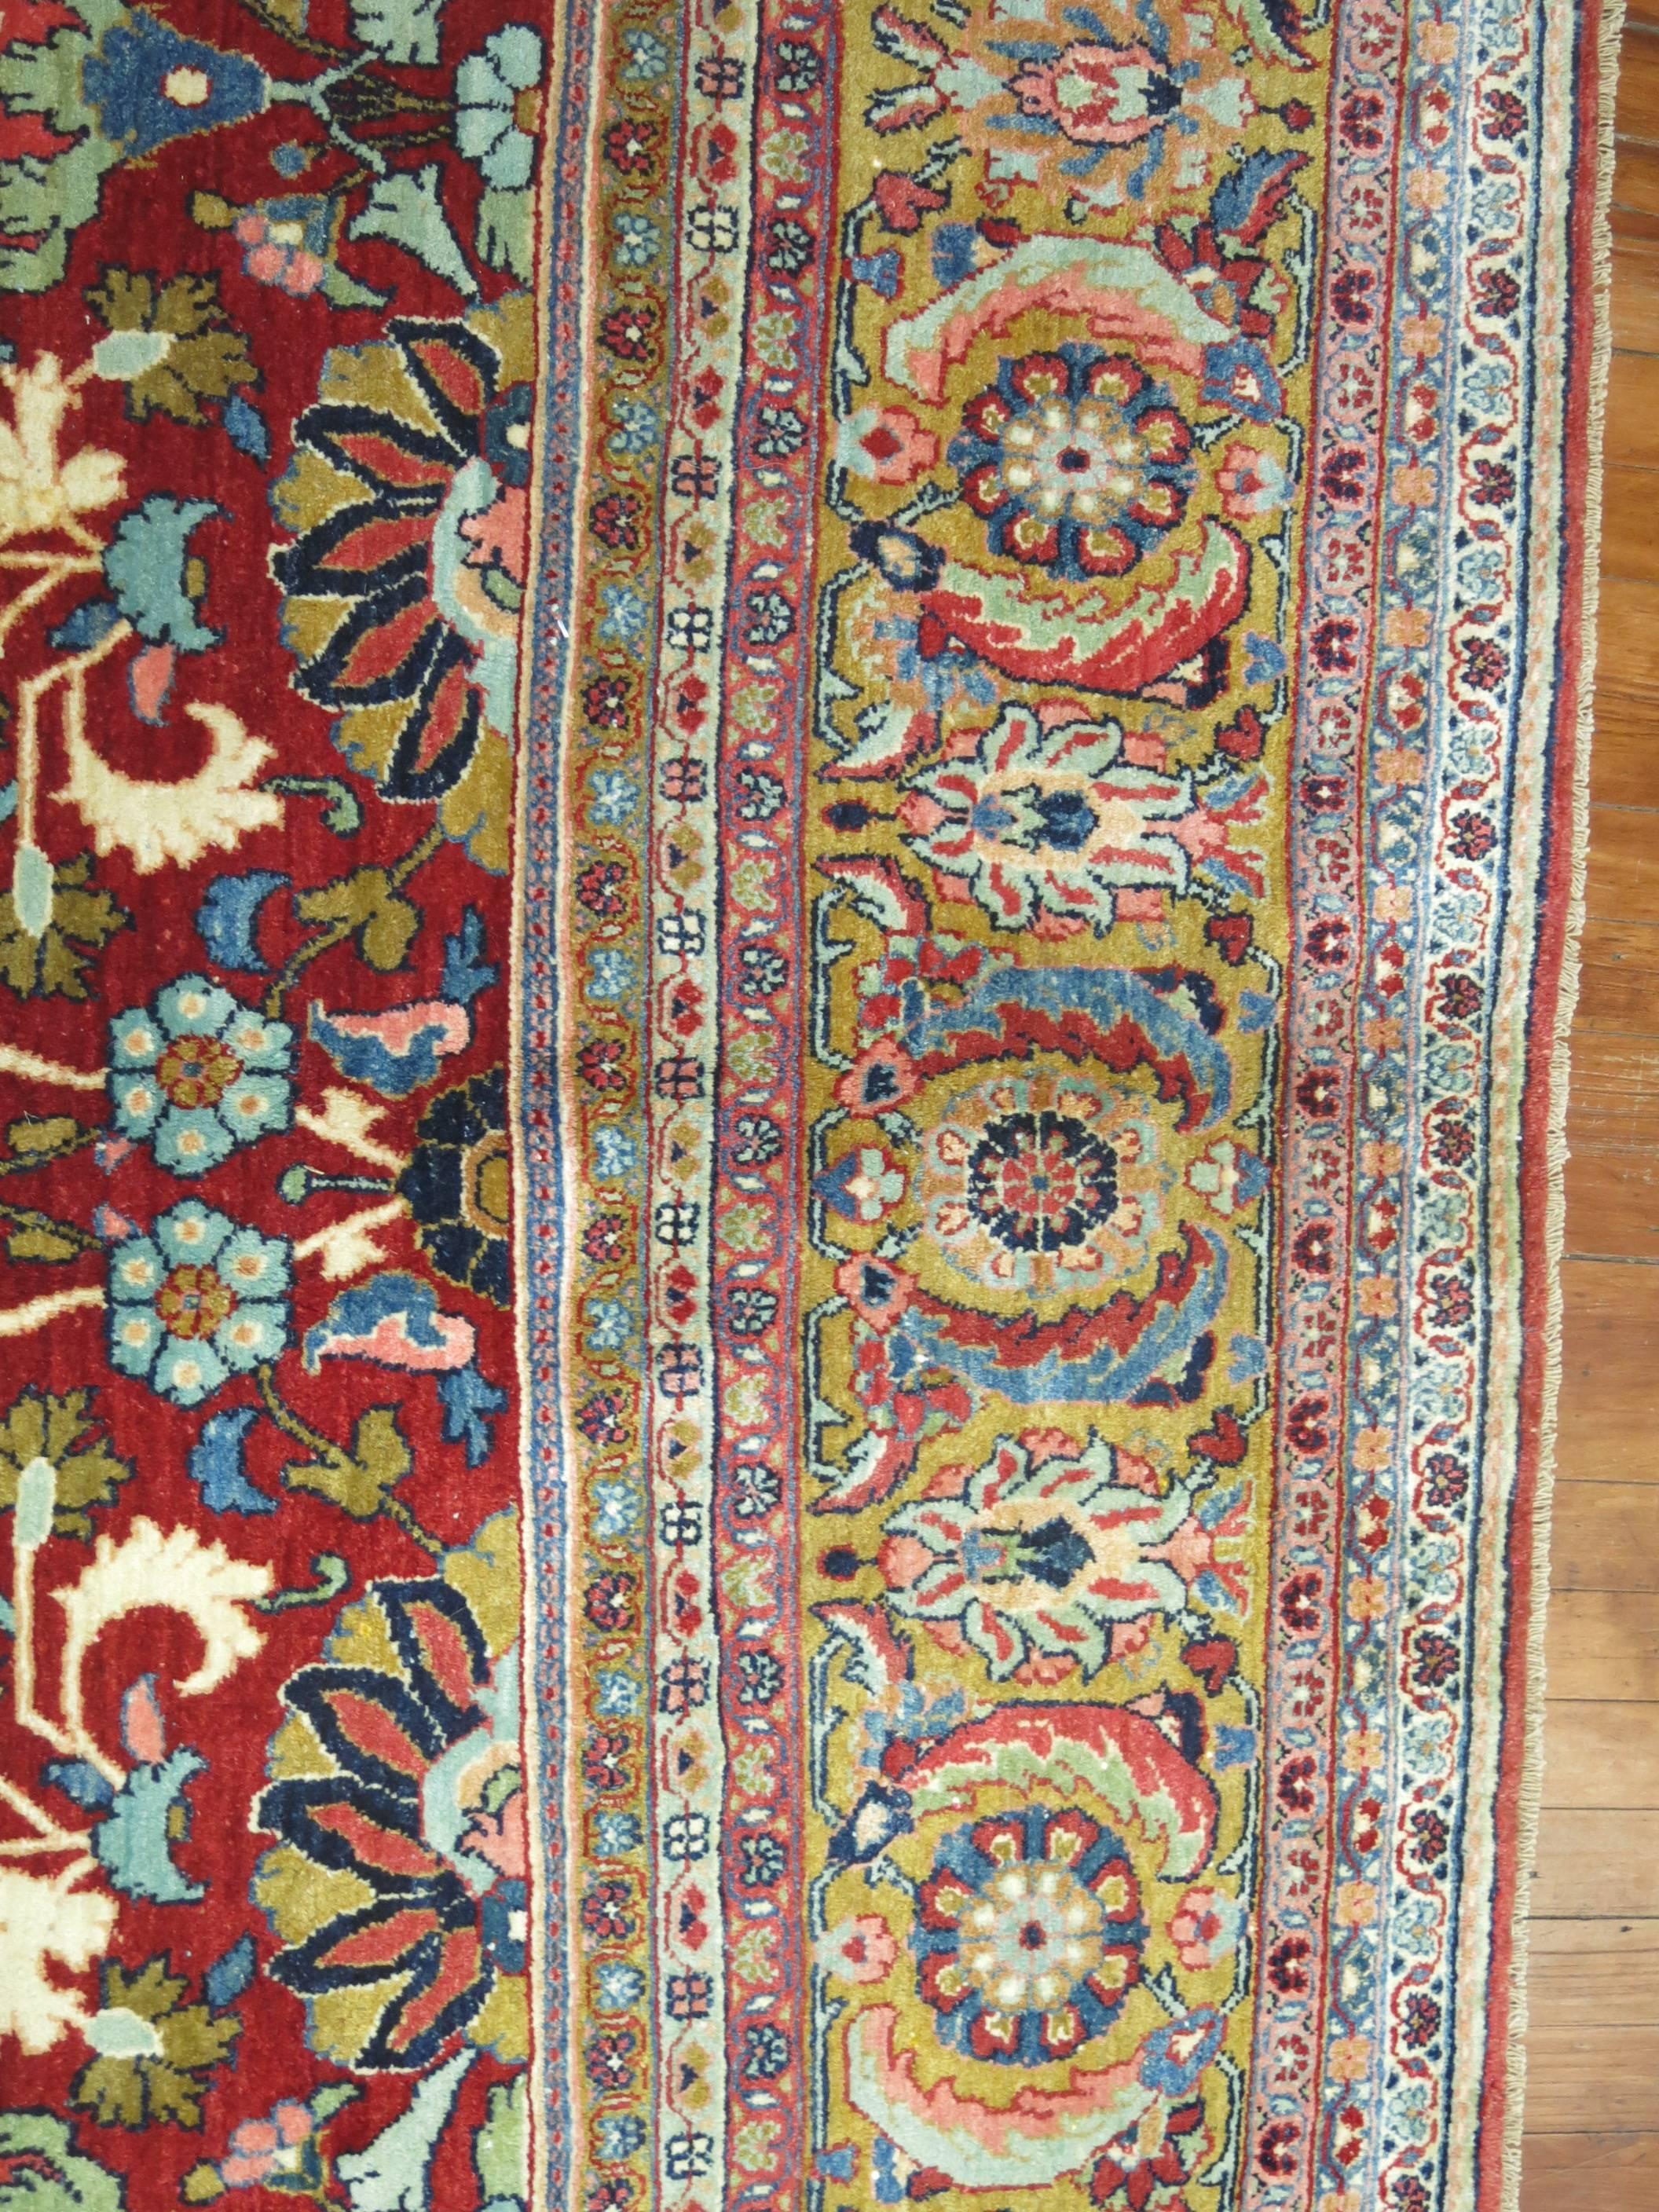 Jazzy Antique Persian Tabriz Sarouk Carpet In Good Condition For Sale In New York, NY